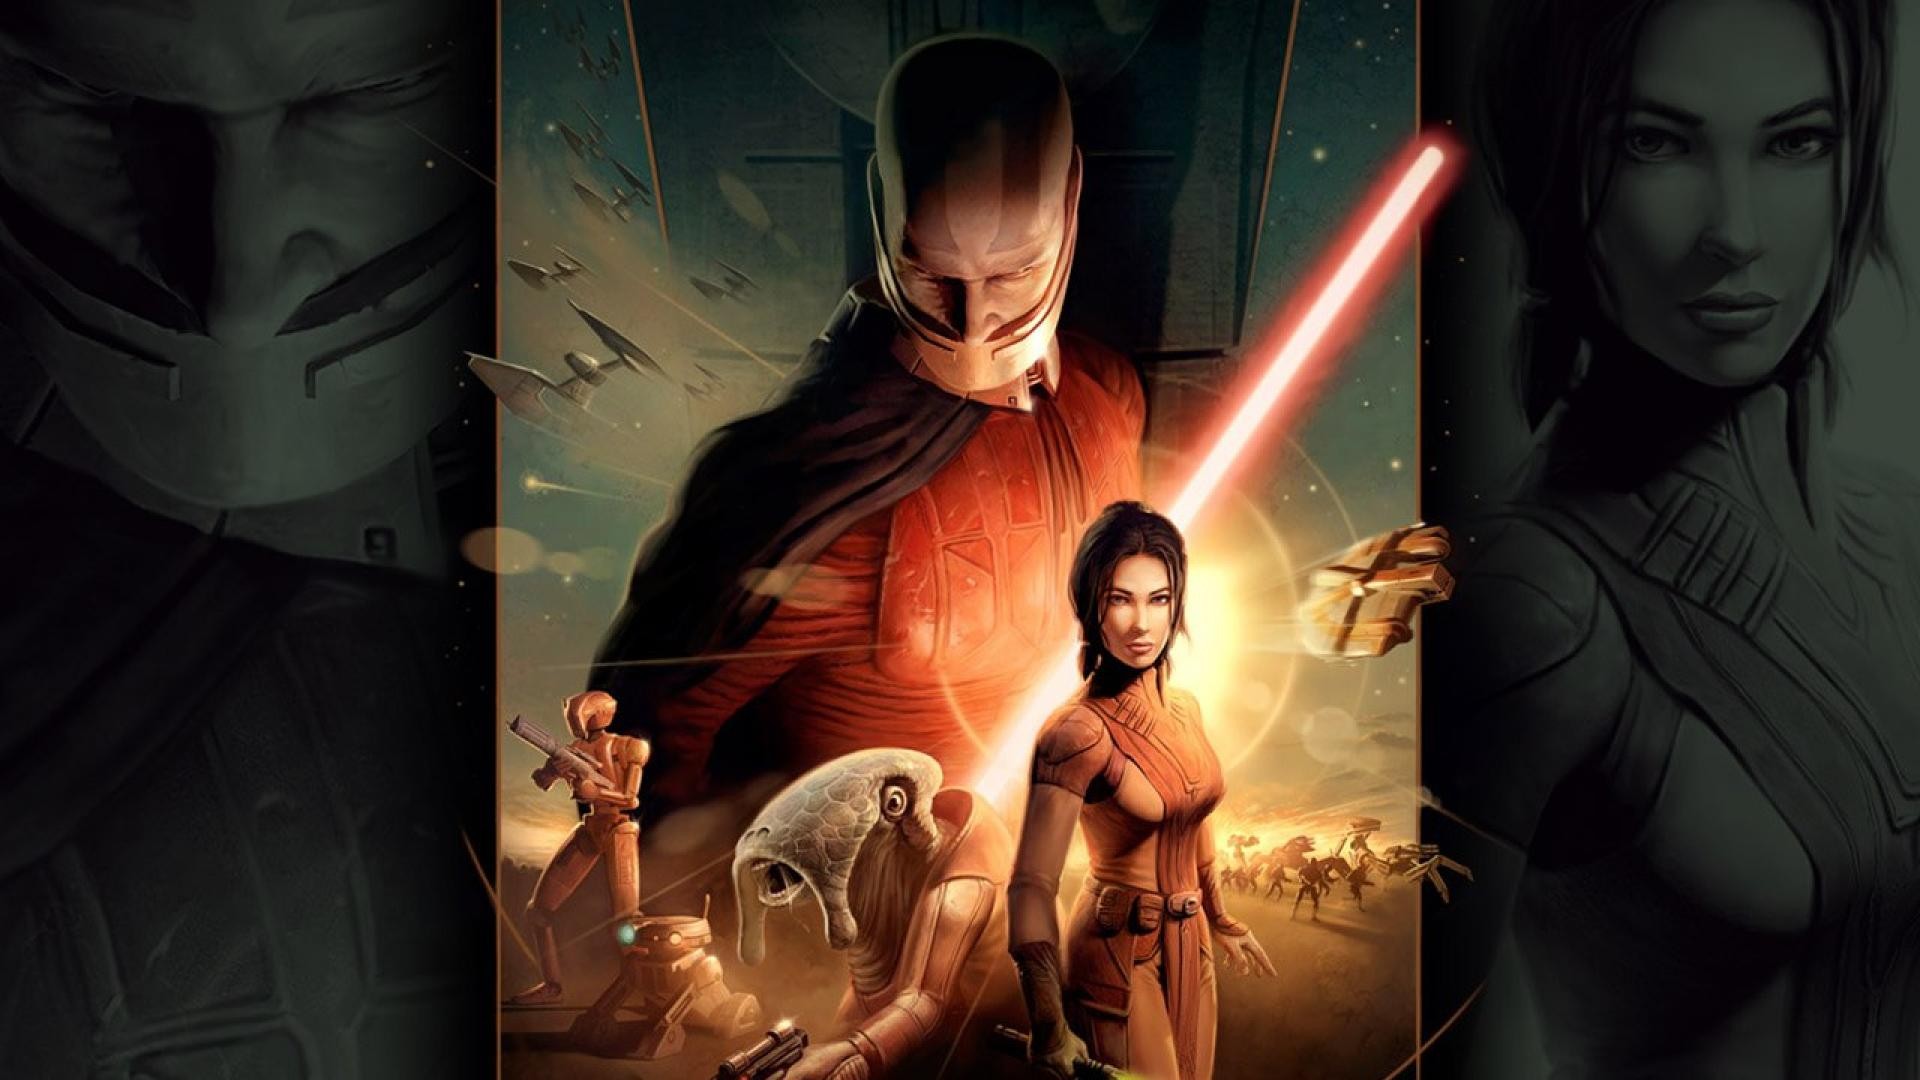  knights of the old republic video games hd wallpaper knights of the 1920x1080